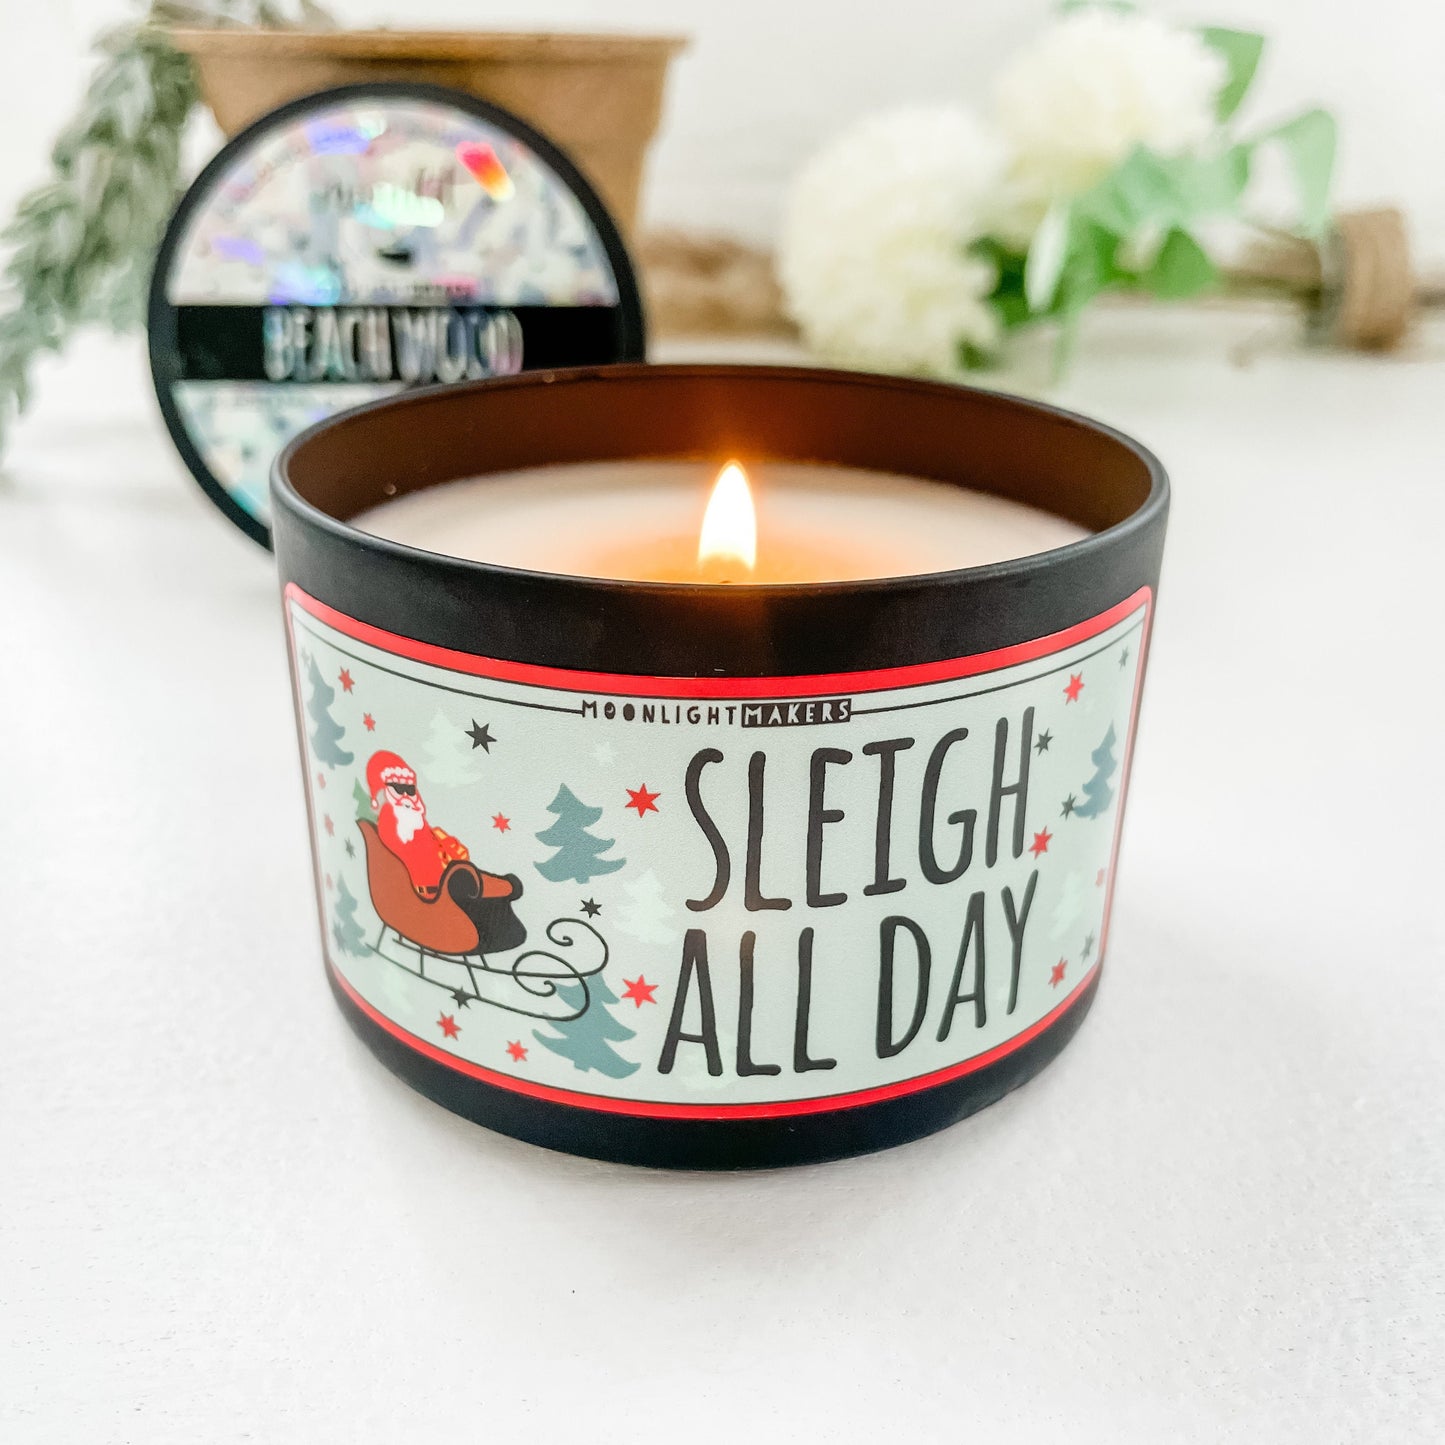 Sleigh All Day - 8oz Candle - Choose Your Scent - 100% Natural Soy Wax